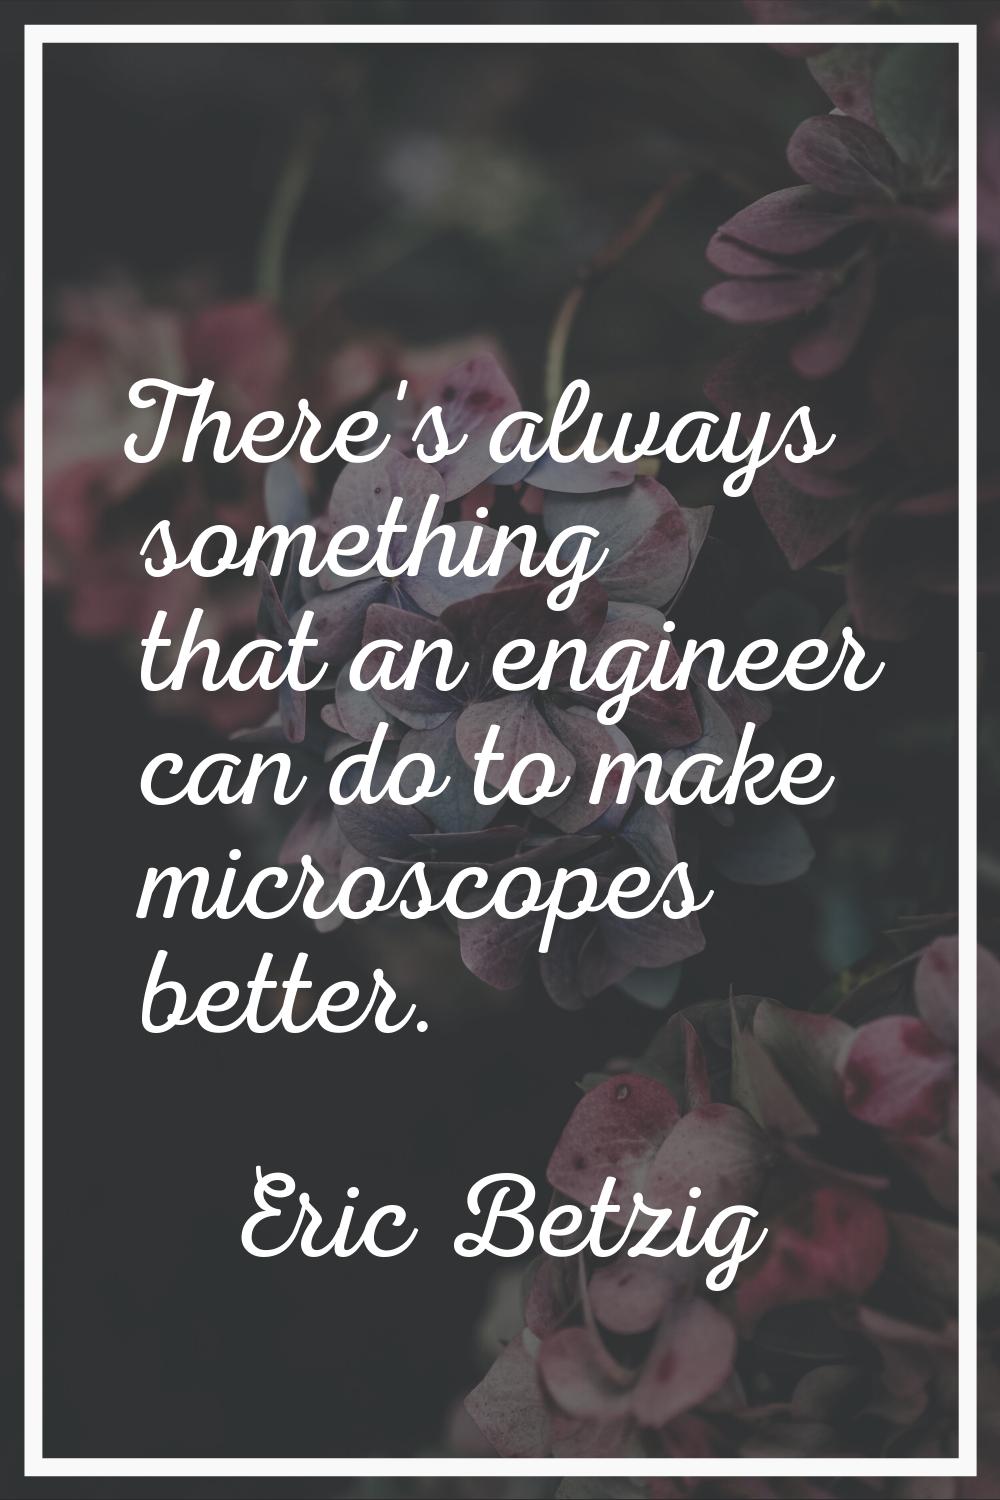 There's always something that an engineer can do to make microscopes better.